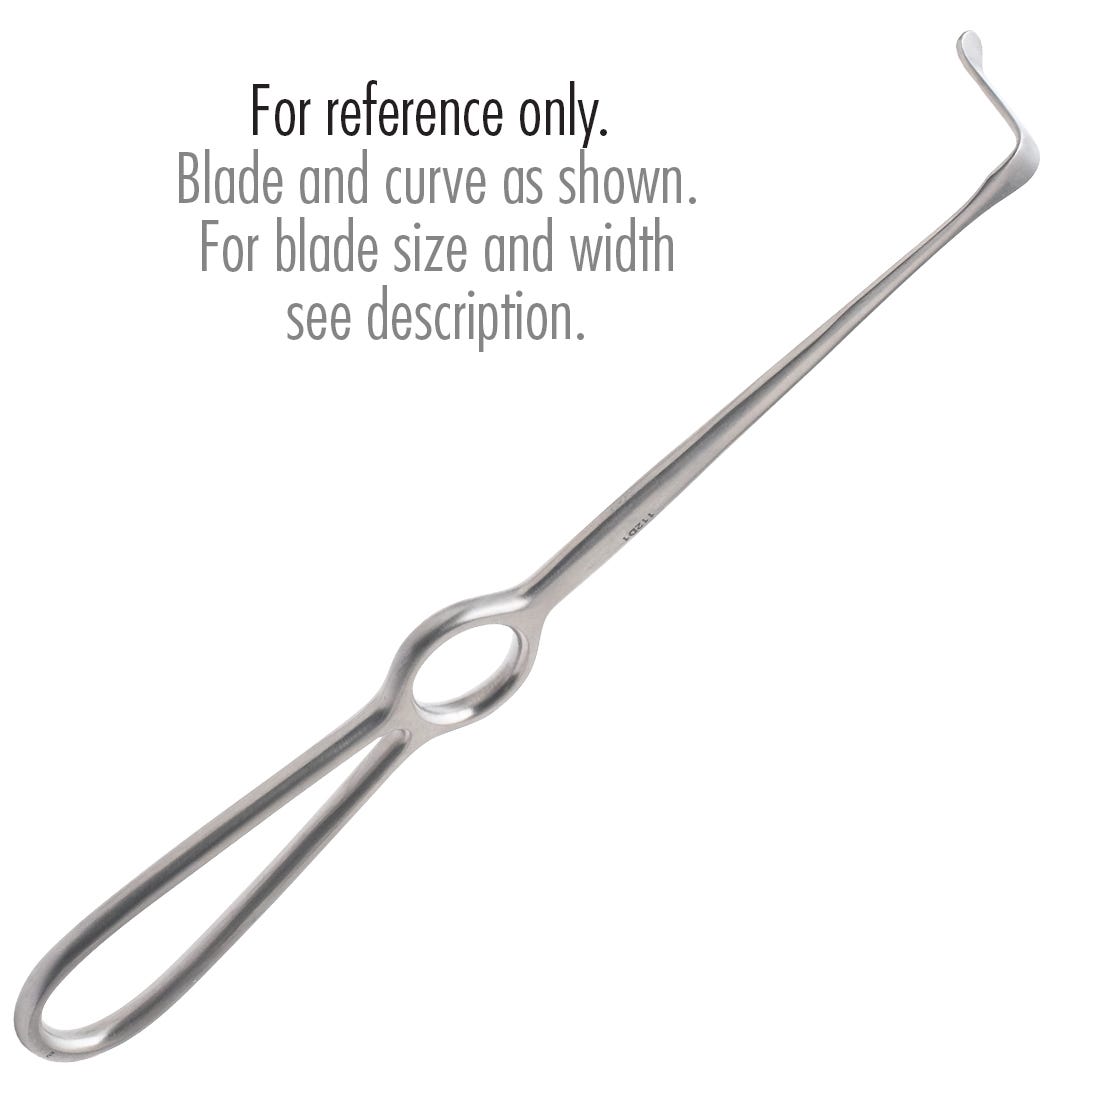 Obwegeser Type Surgical Retractor Standard, Curved Up, 16mm x 80mm